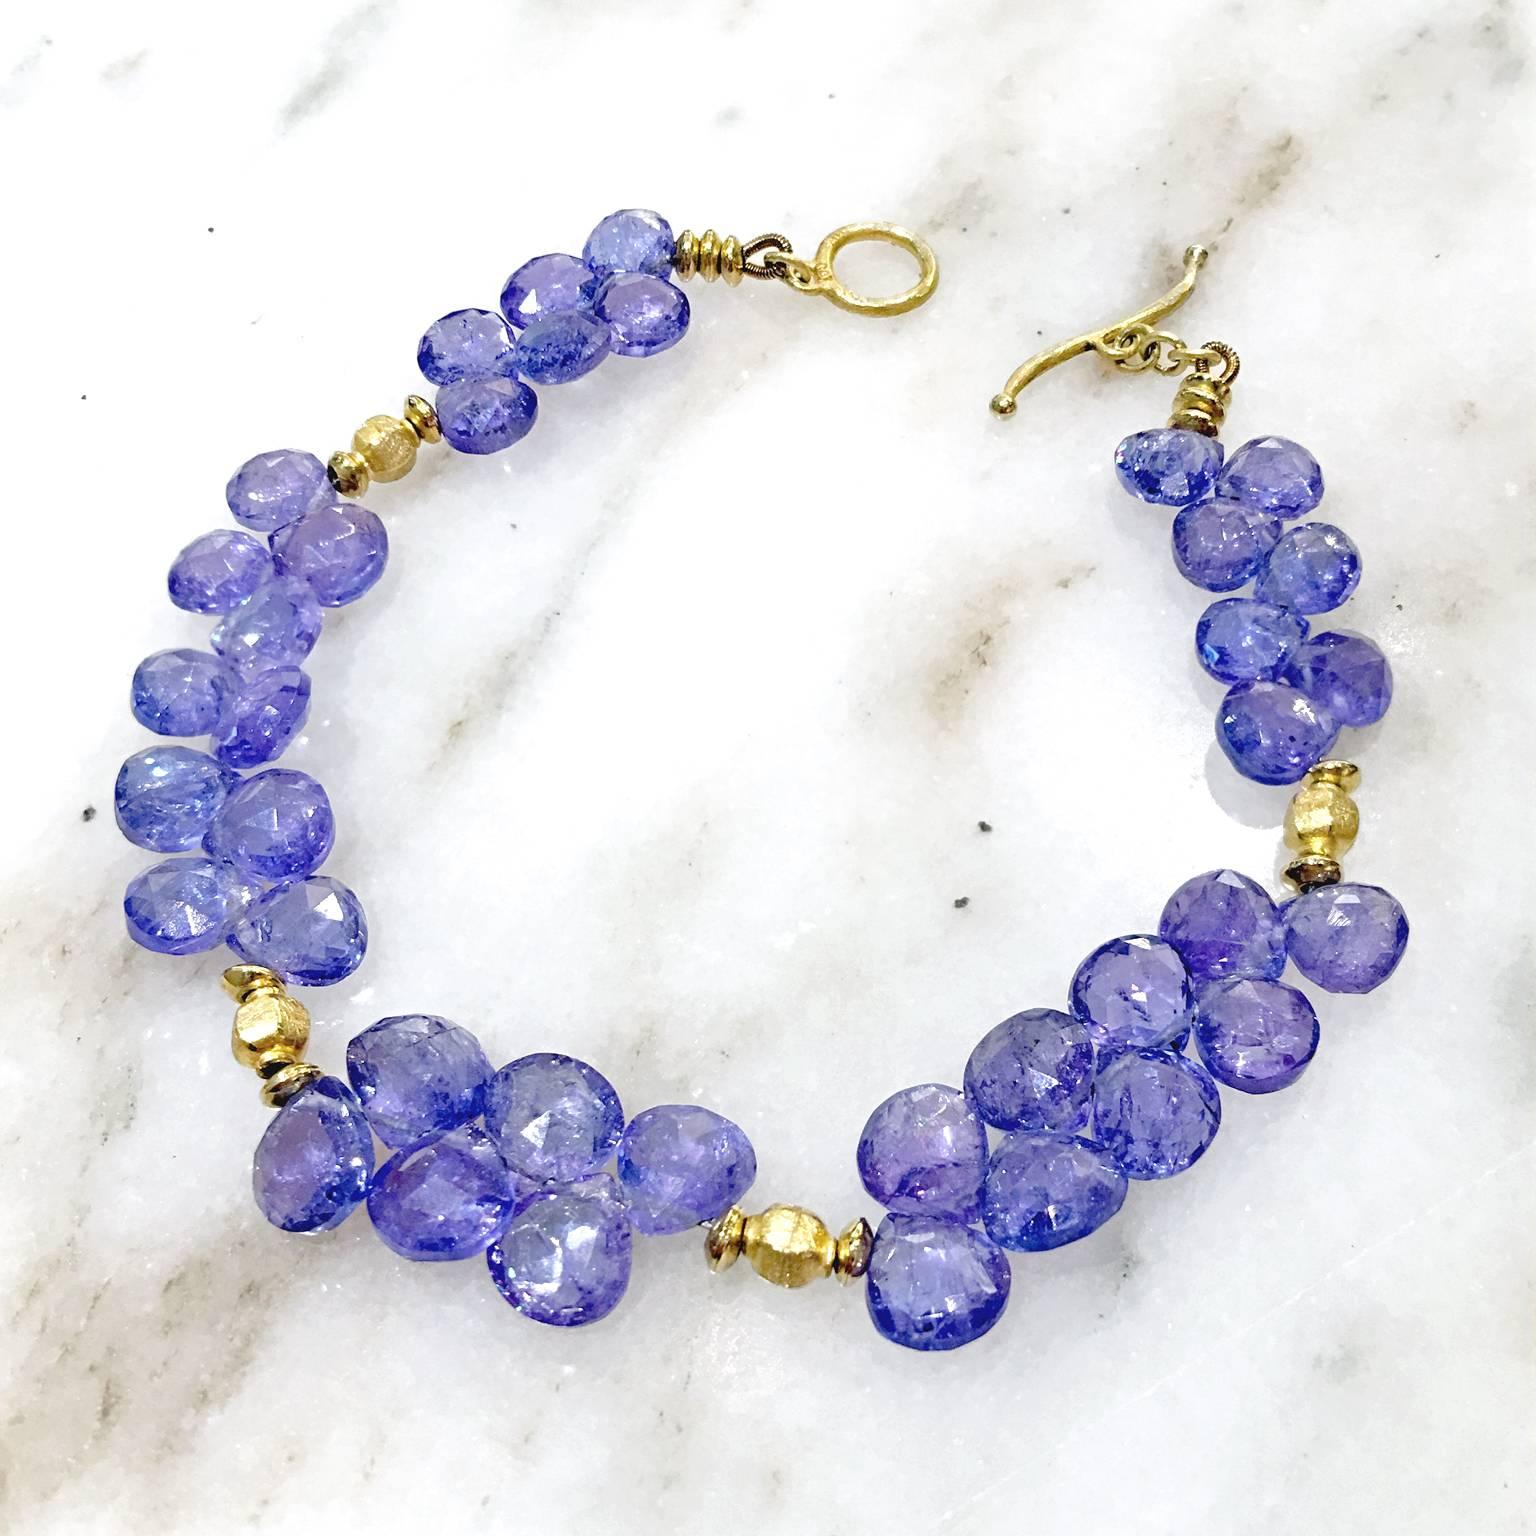 Briolette Bracelet handcrafted in matte-finished 18k yellow gold featuring 38 shimmering faceted tanzanite briolettes and a curved toggle clasp. Stamped Au / 750 with Barbara's signature leaf hallmark. 